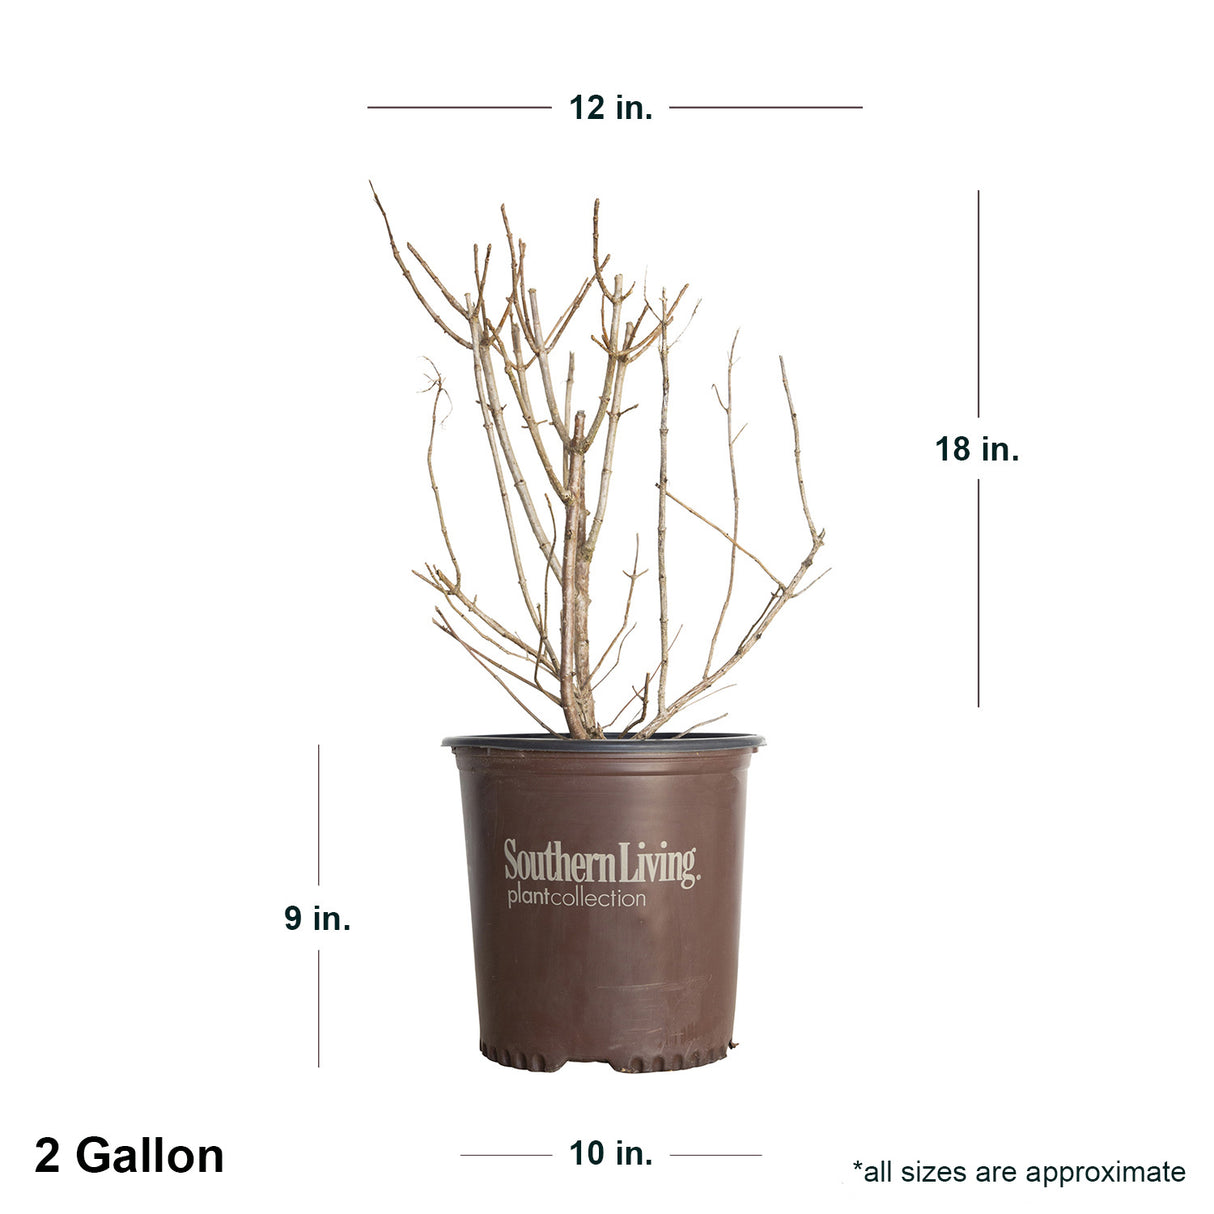 2 Gallon Hydrangea Moon Dance in southern living container showing dimensions